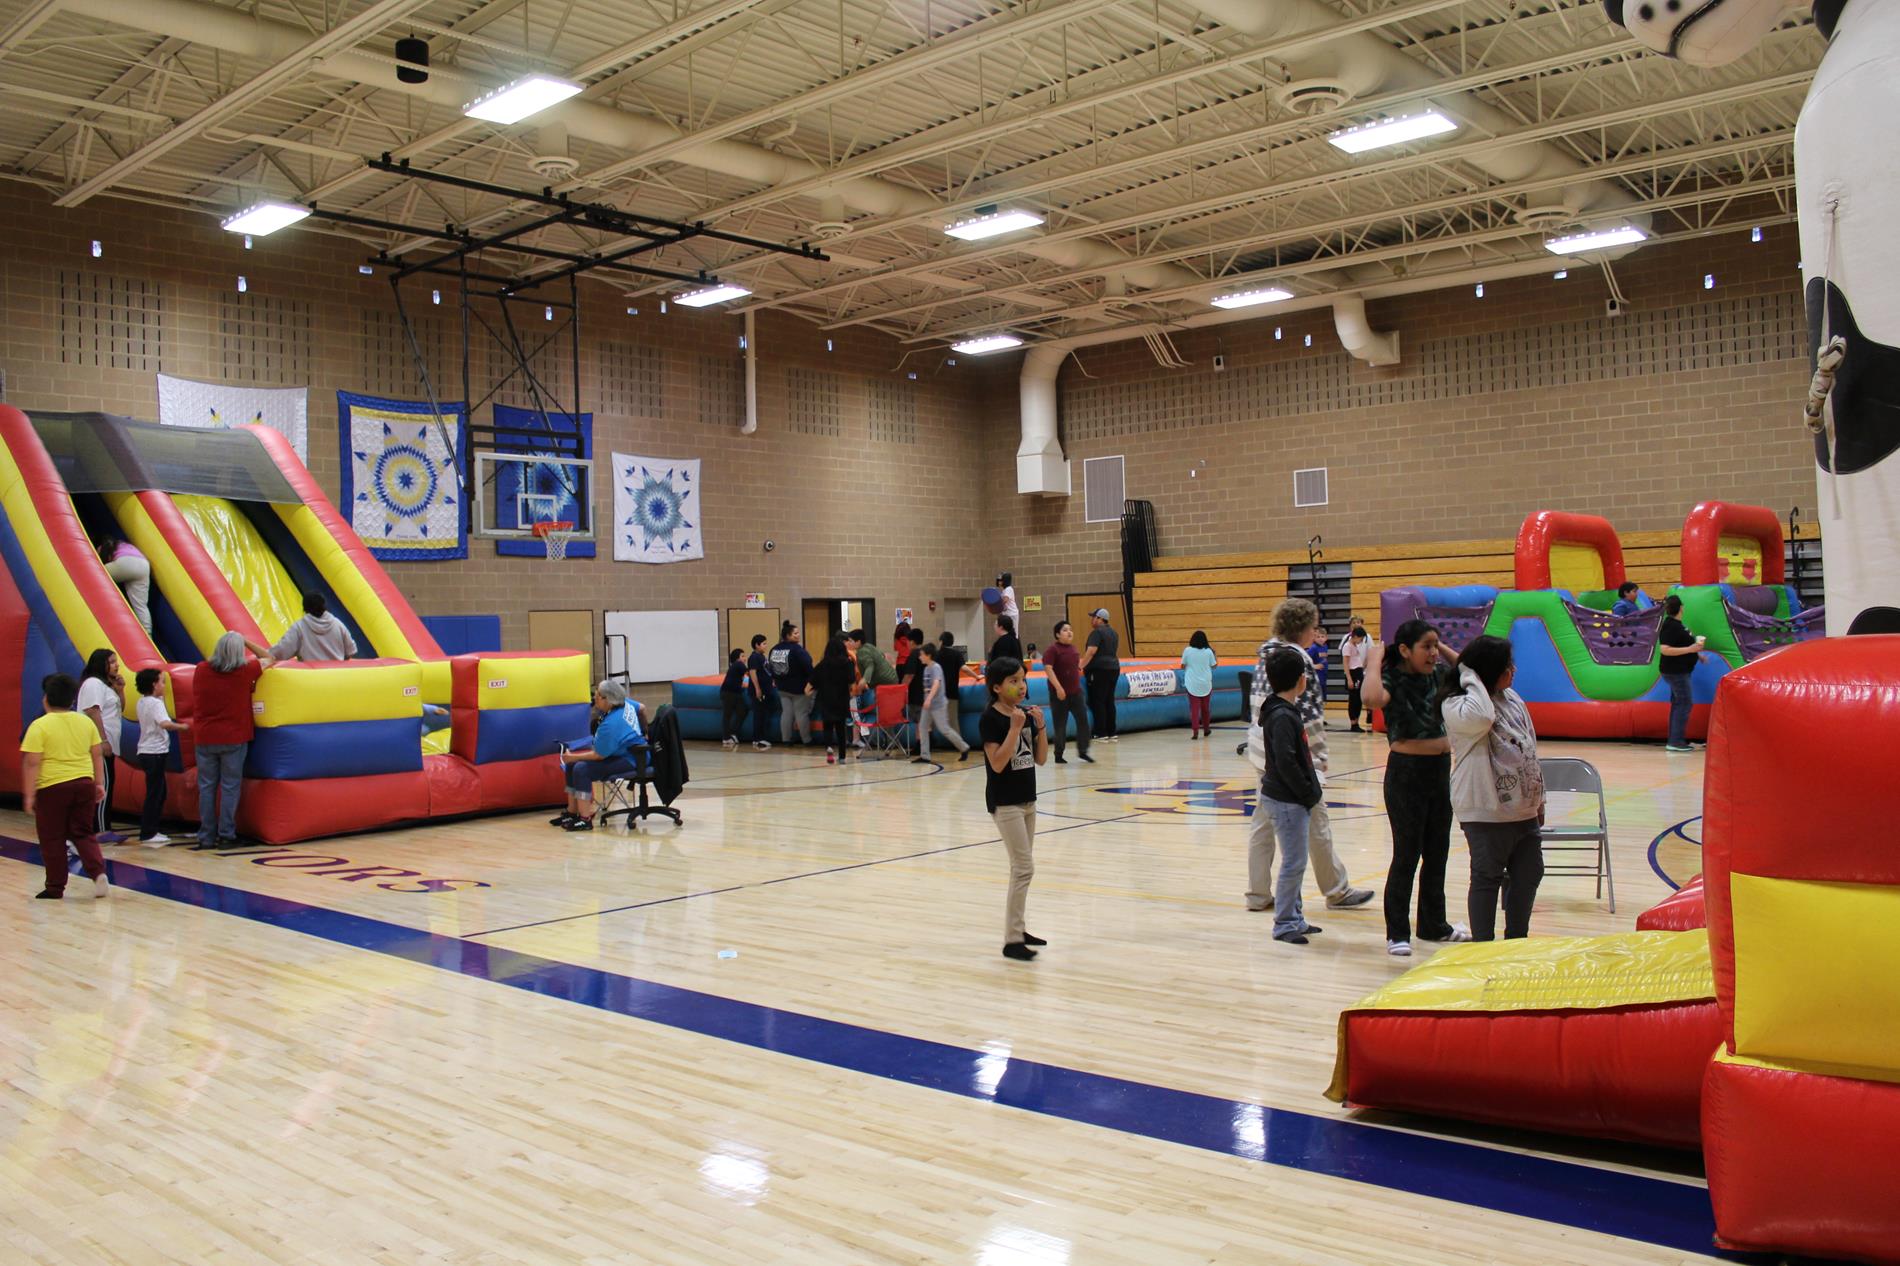 Inflatables in the gym